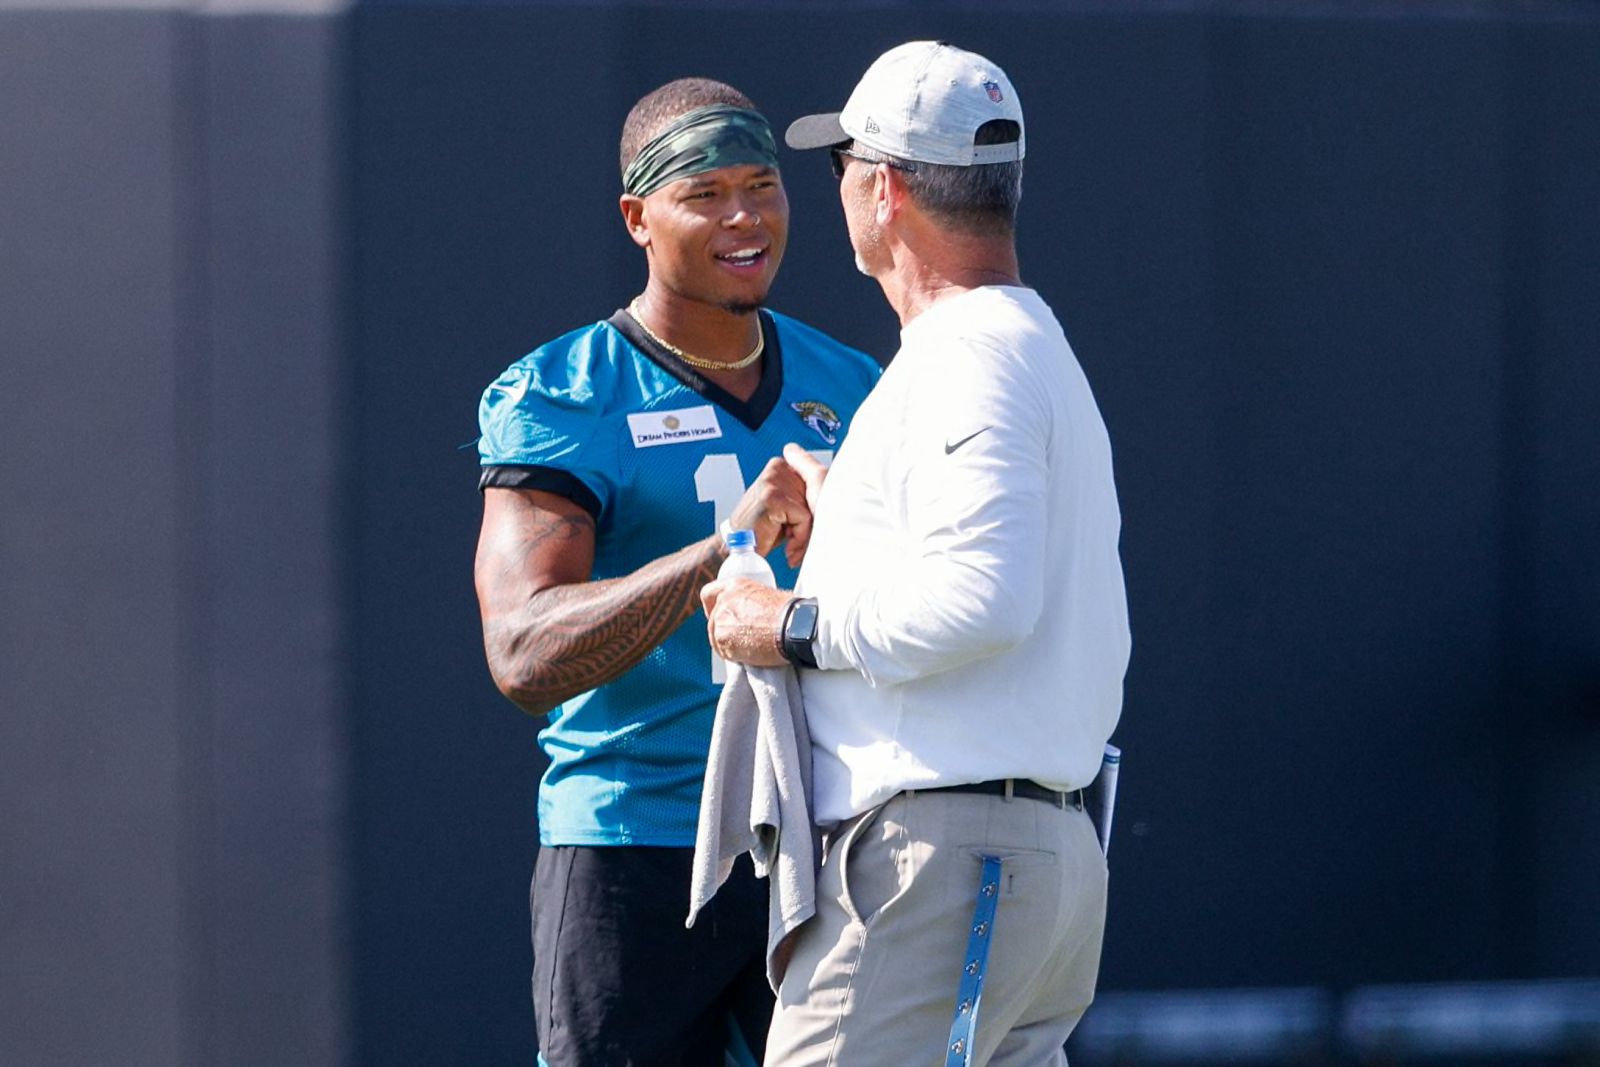 Jacksonville Jaguars working out kinks, Day 4 of training camp takeaways - Page 3